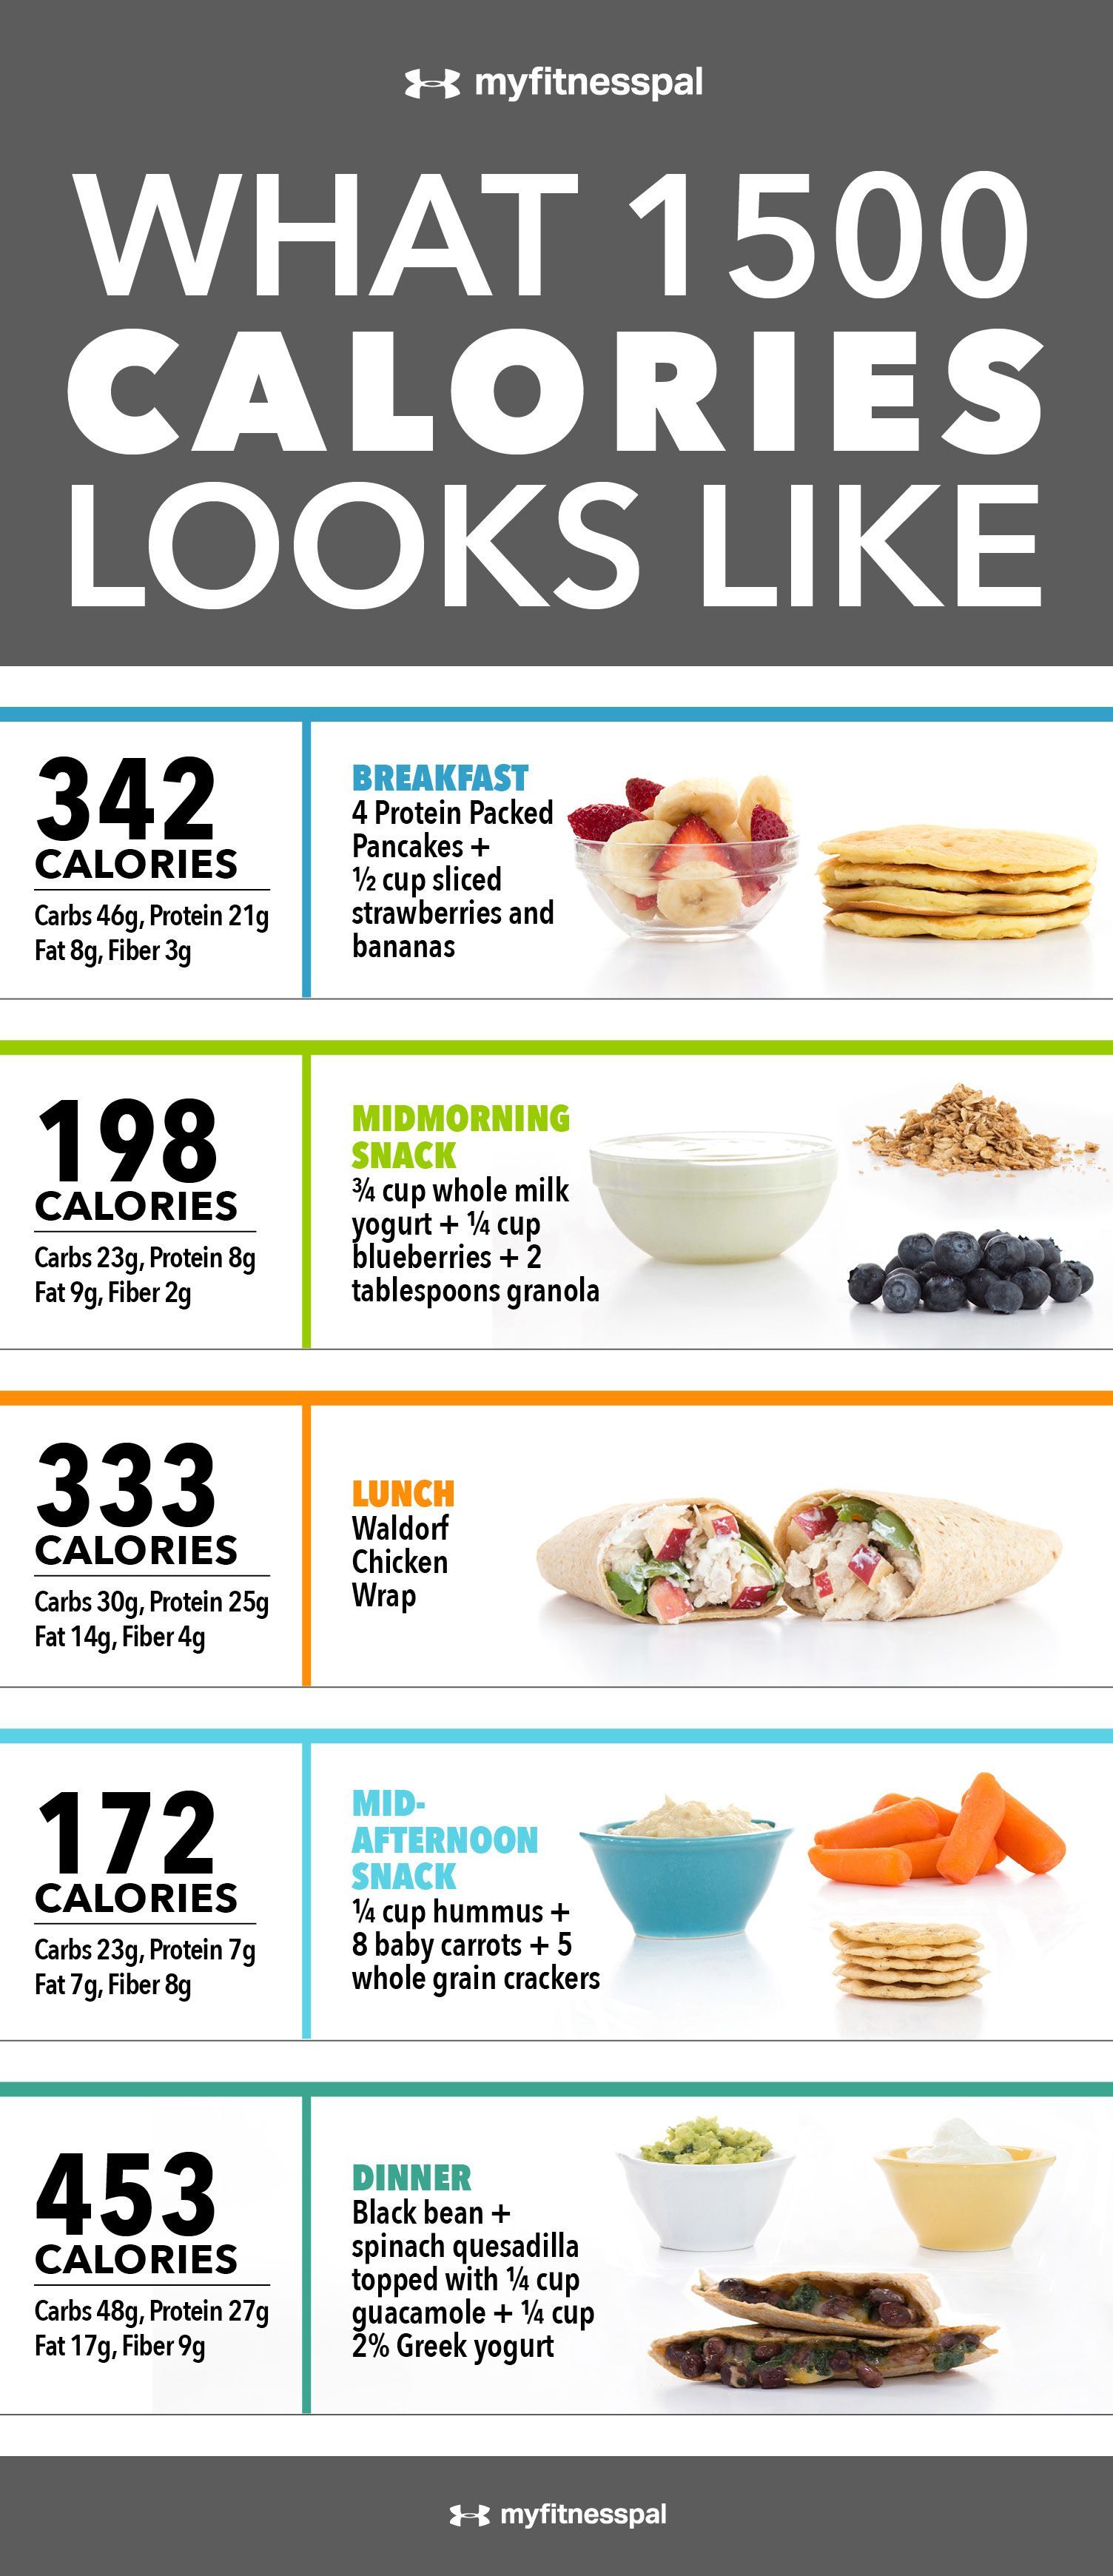 Trying to clean up your diet and cut calories? A budget of 1,500 calories a day can be pretty satisfying when you fill up on